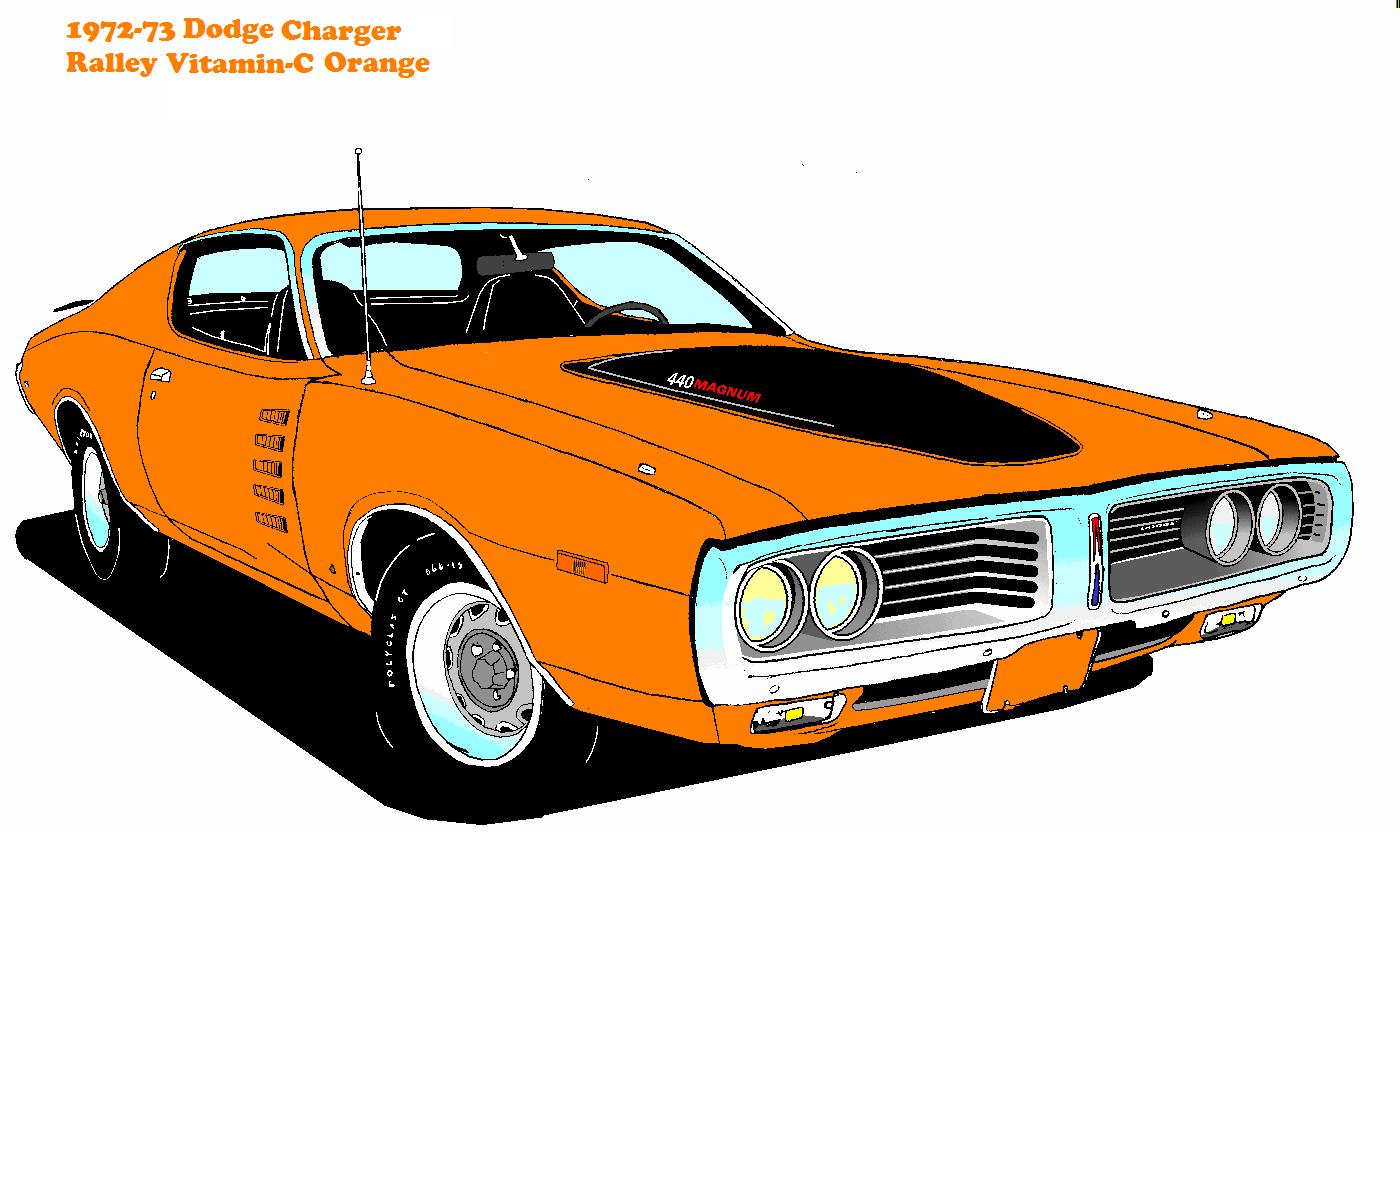 1973 Dodge Charger by 87dodgearies on DeviantArt